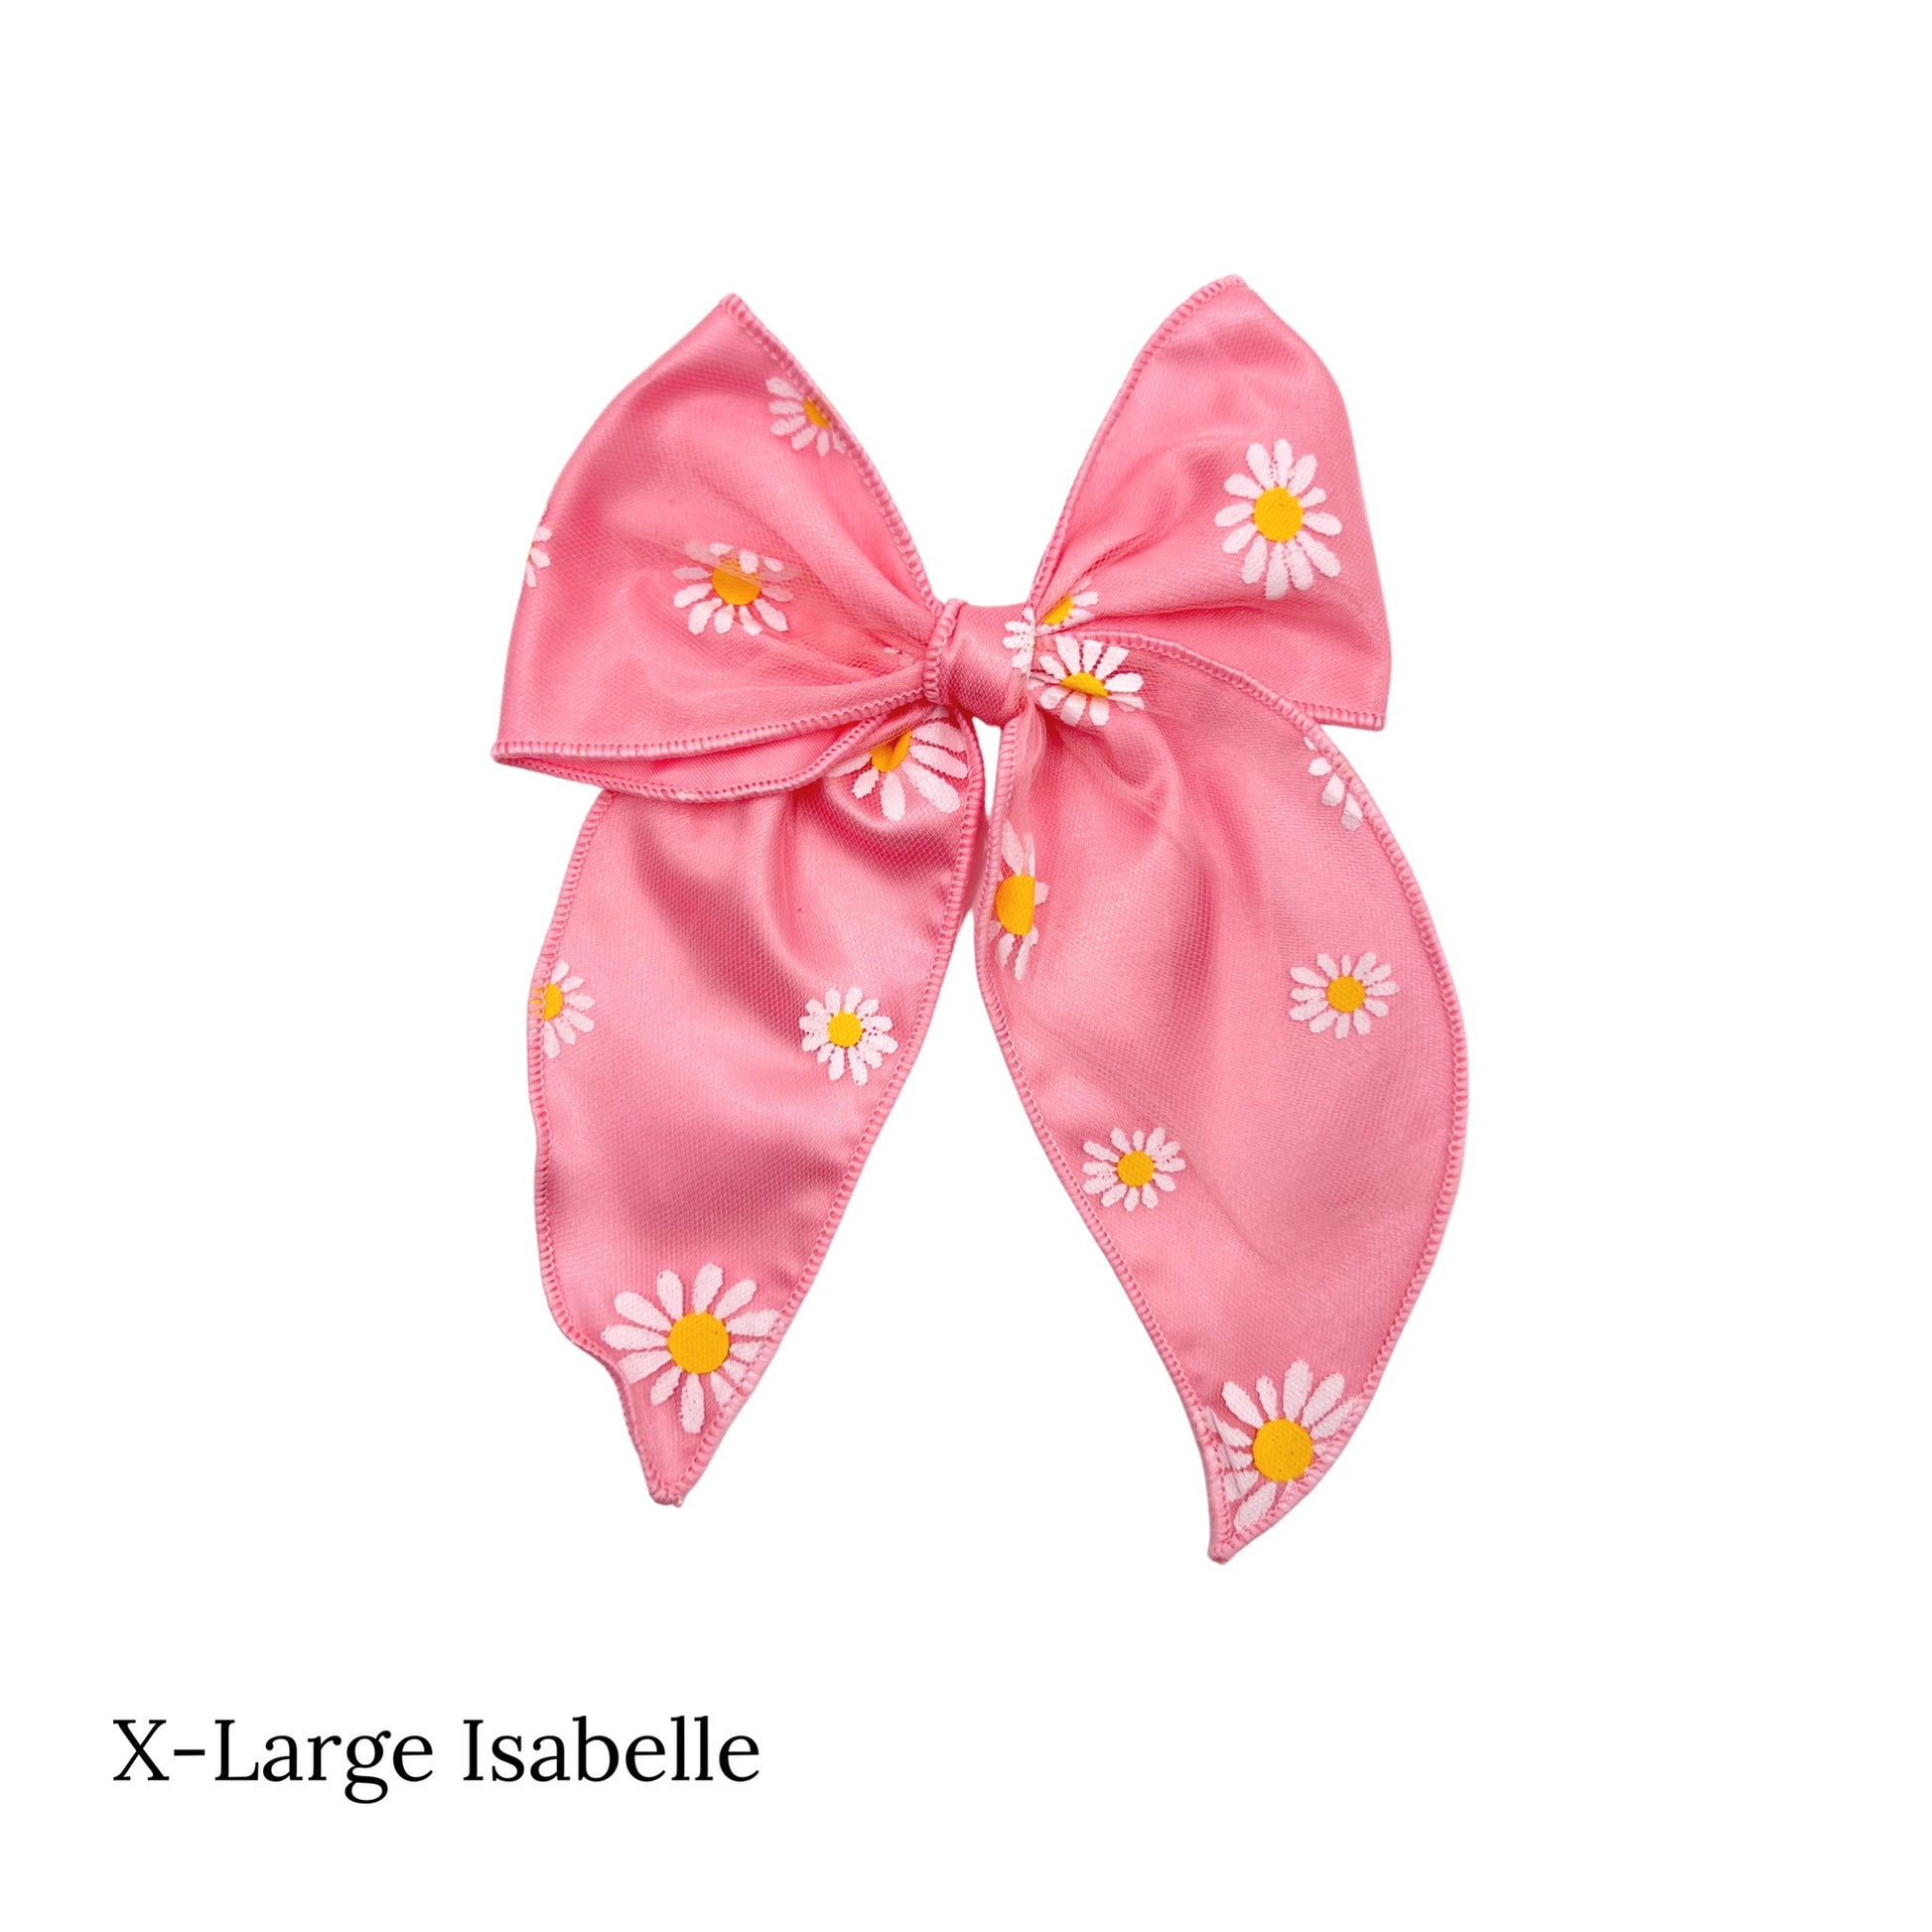 White flowers with yellow center on pink tulle x-large bow strips